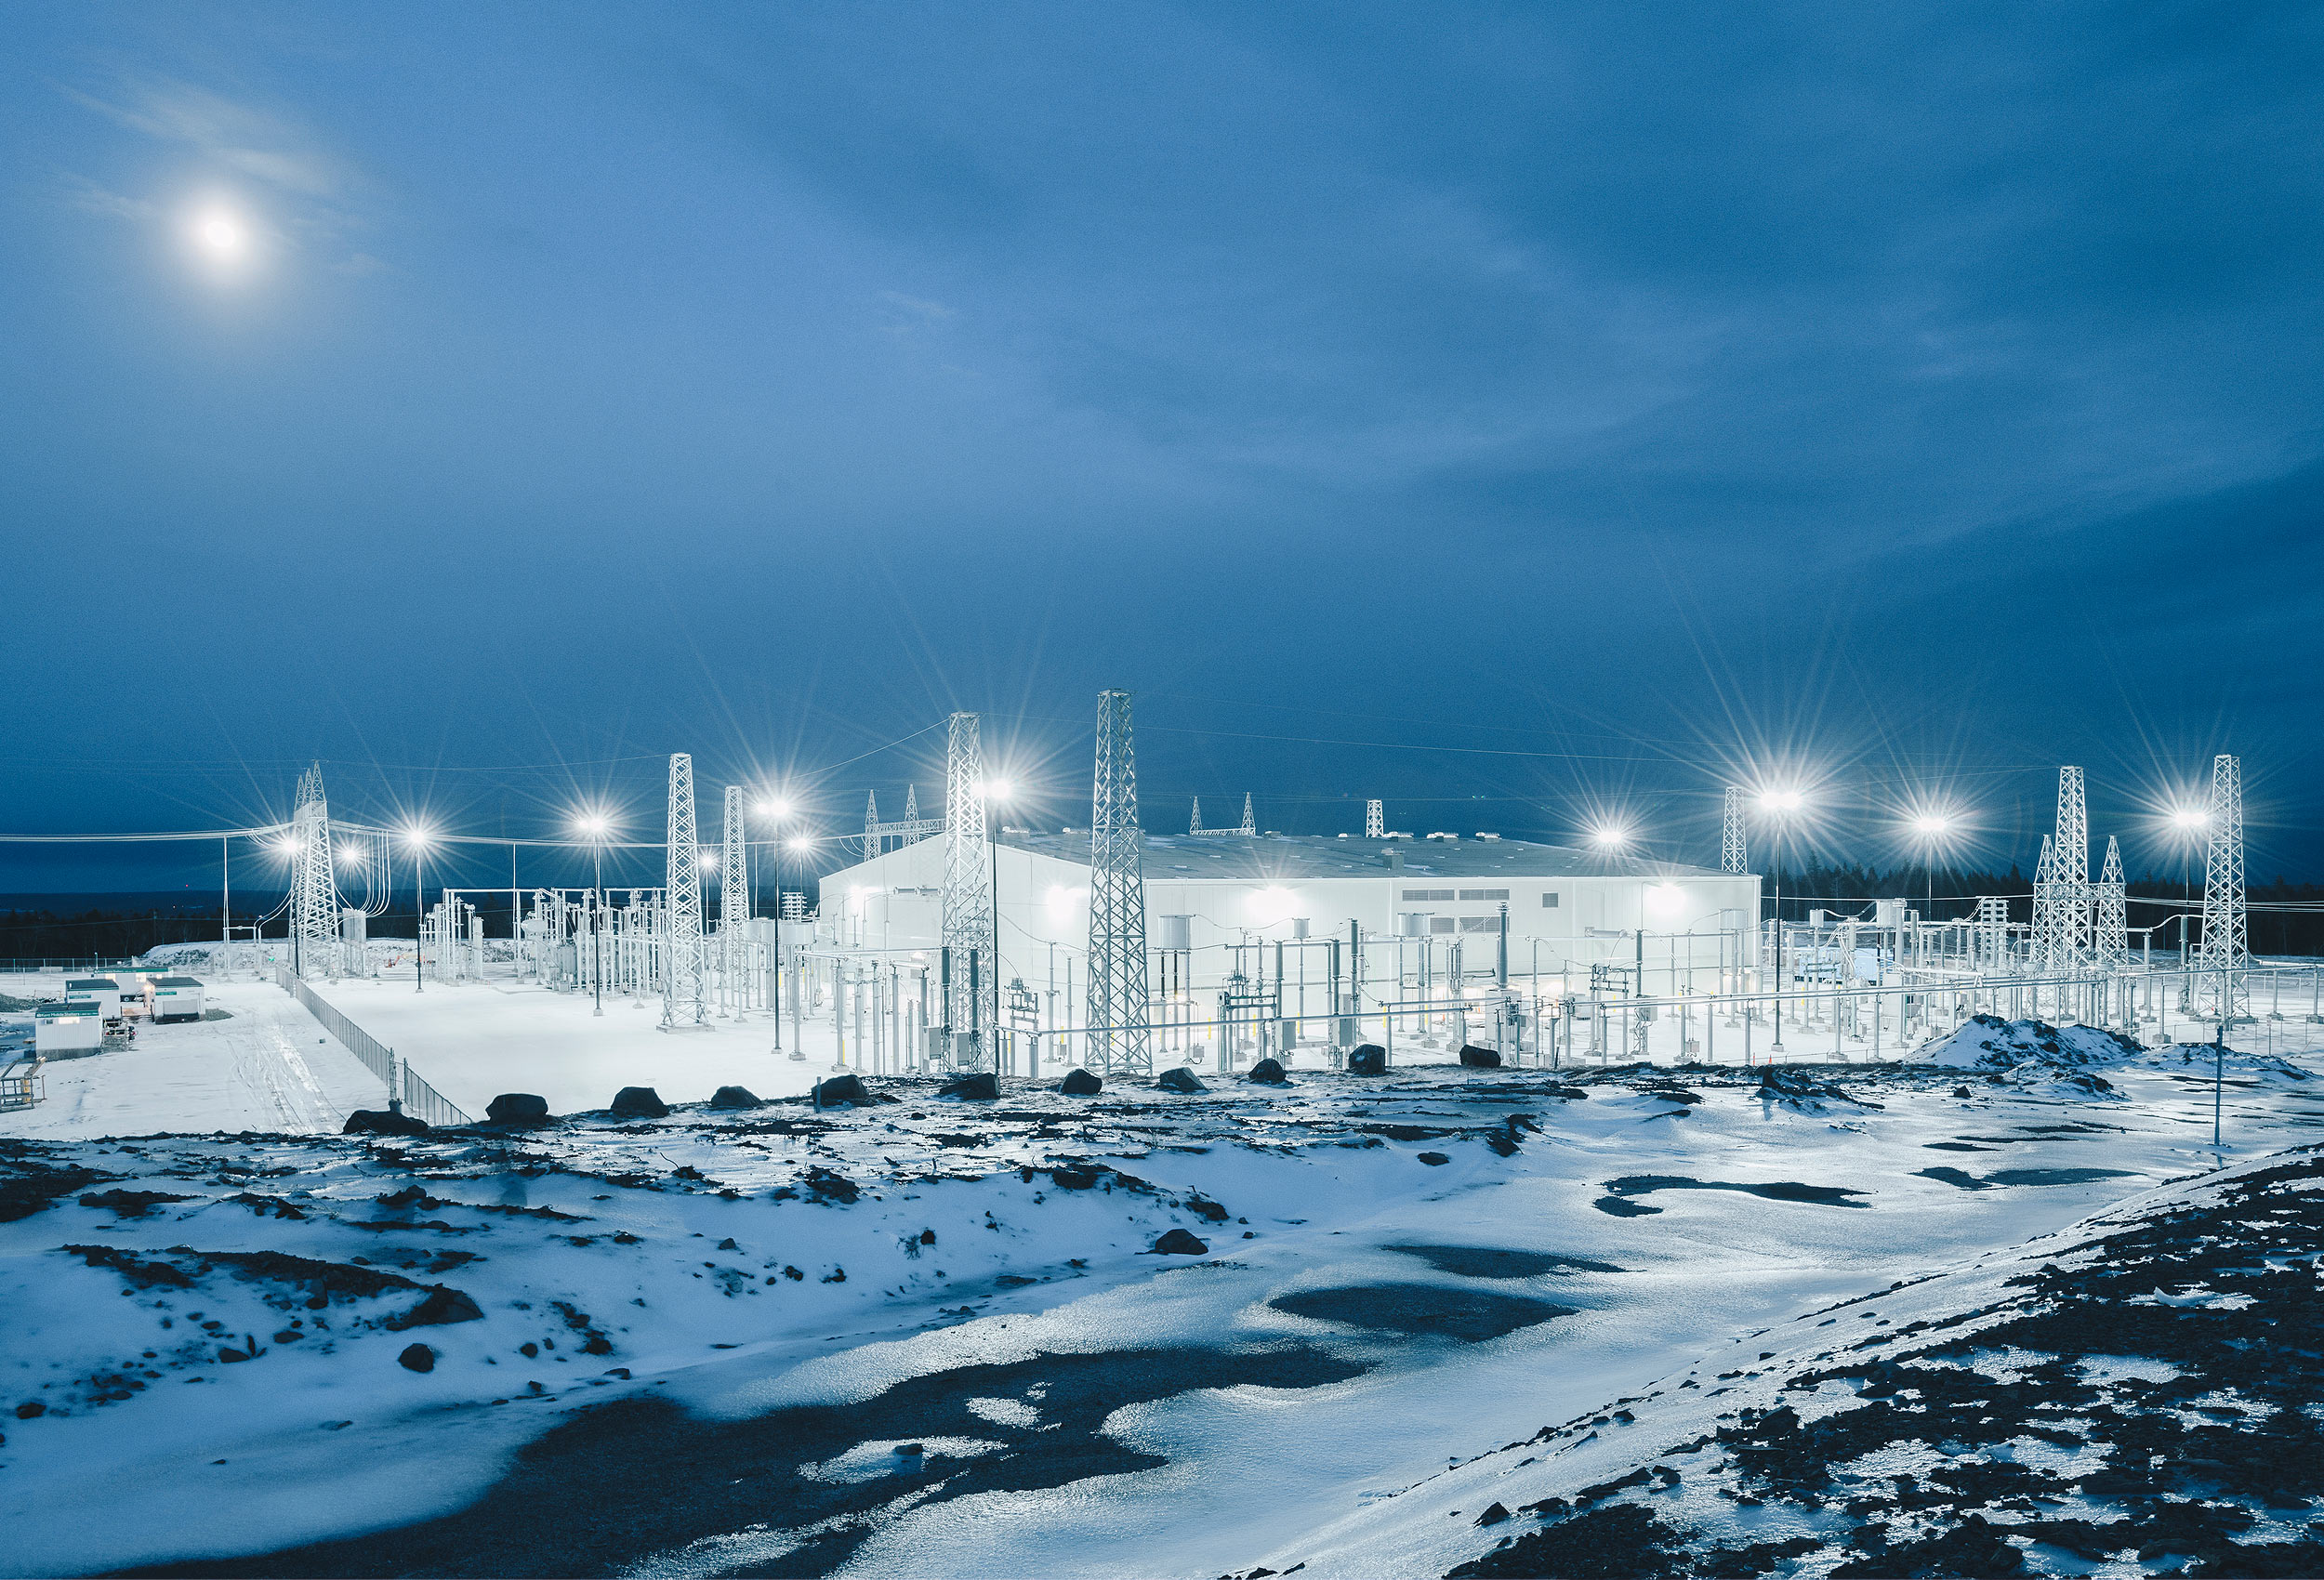 Woodbine sub-station which is part of the Maritime Link energy project in Newfoundland Canada by corporate industrial photographer Kristopher Grunert.